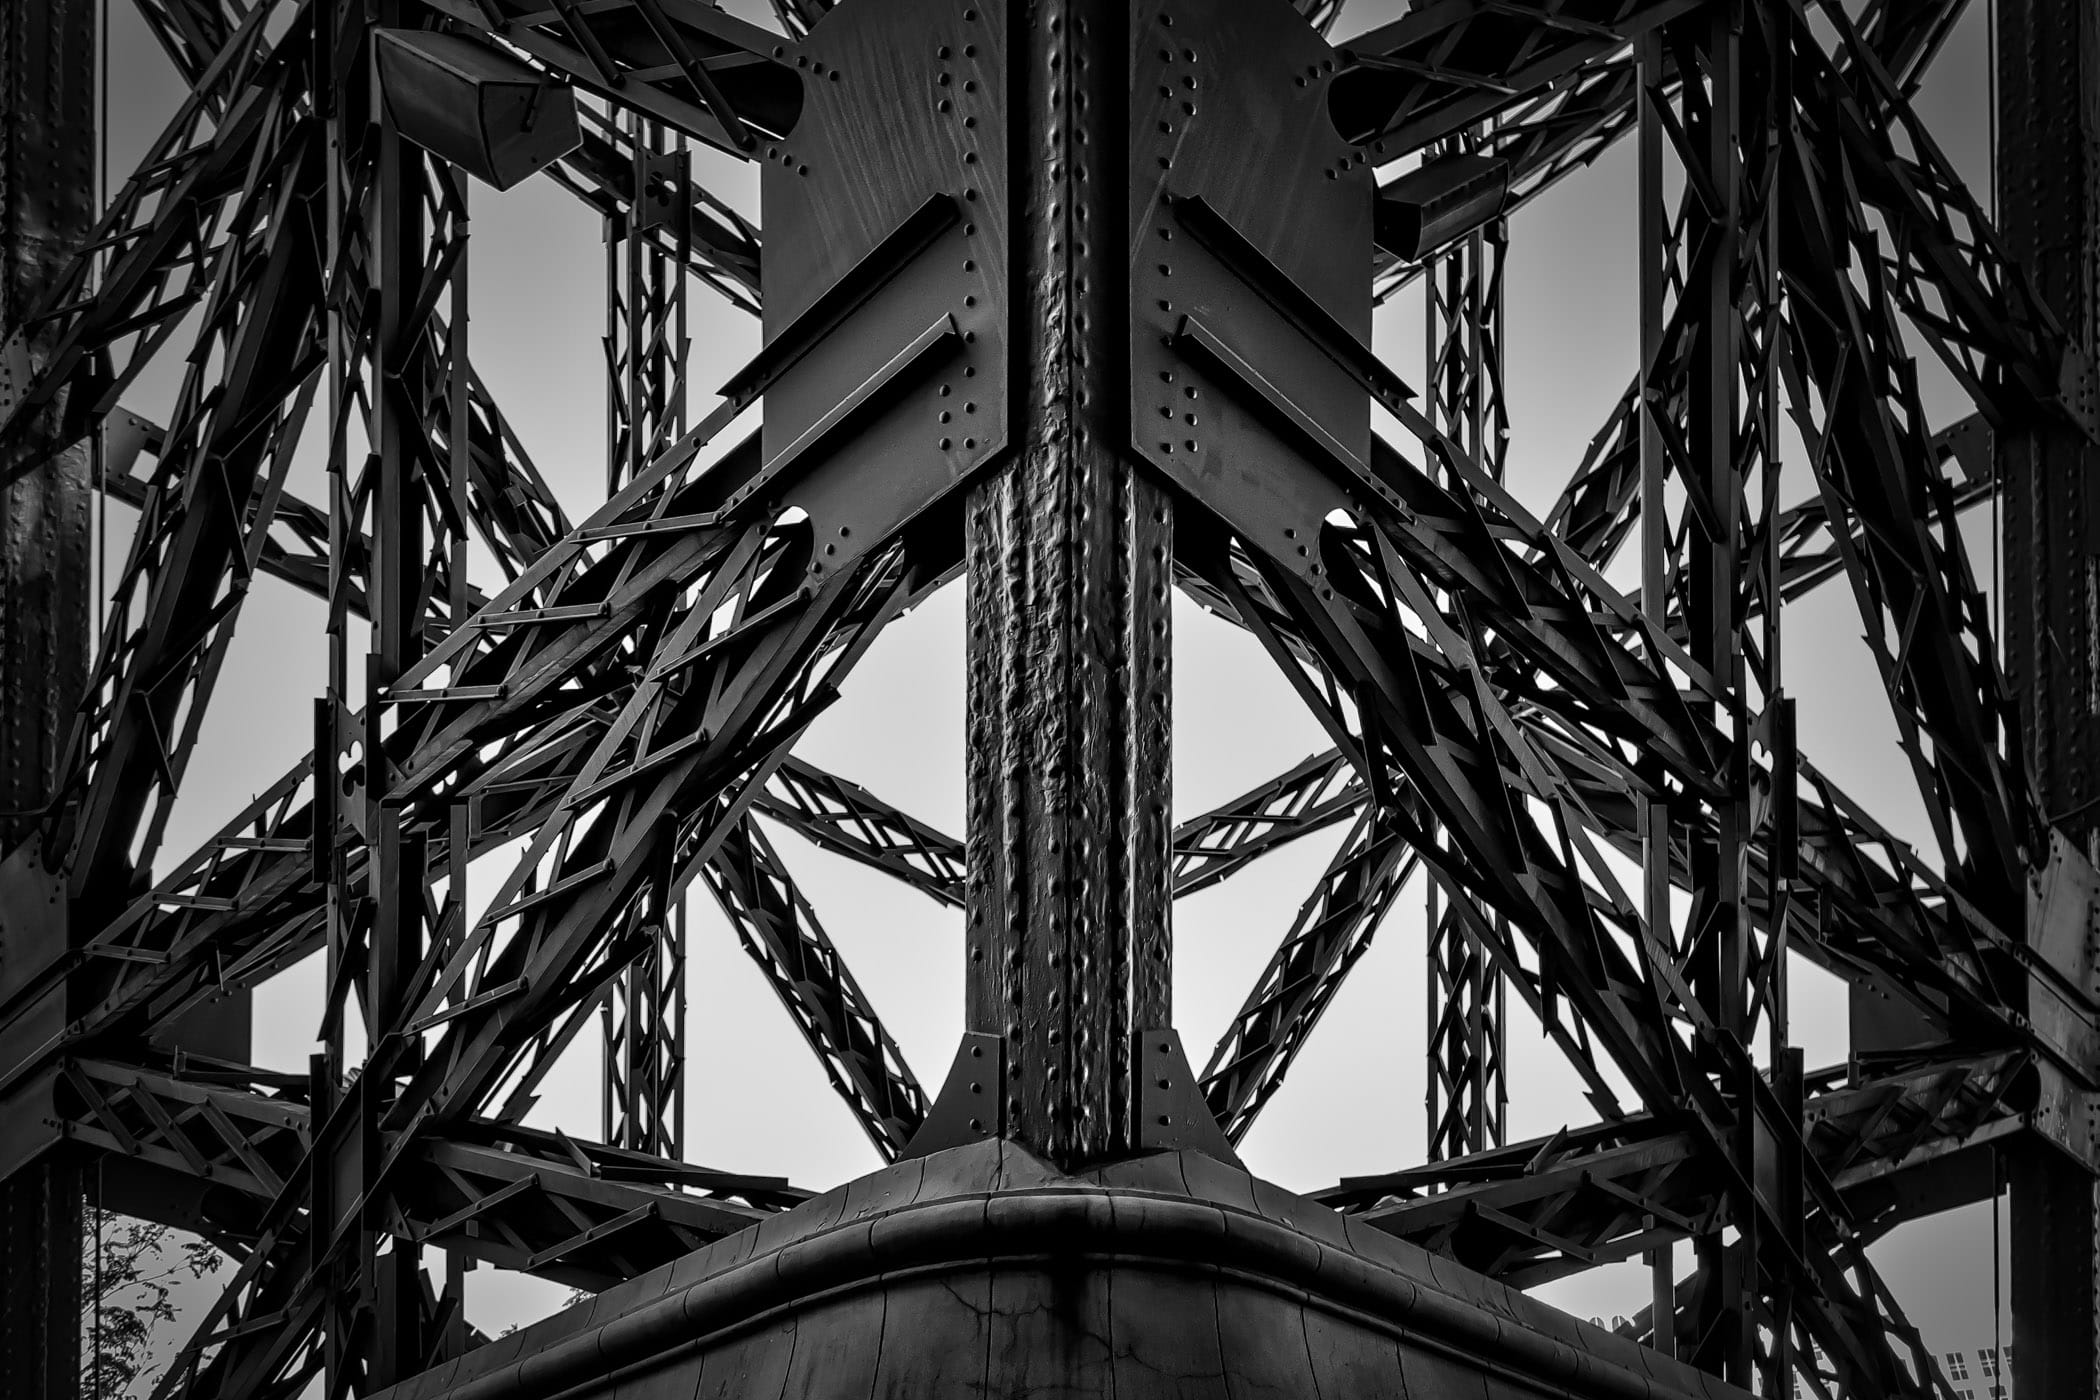 Detail of the iron structure of the replica Eiffel Tower at Paris Las Vegas.